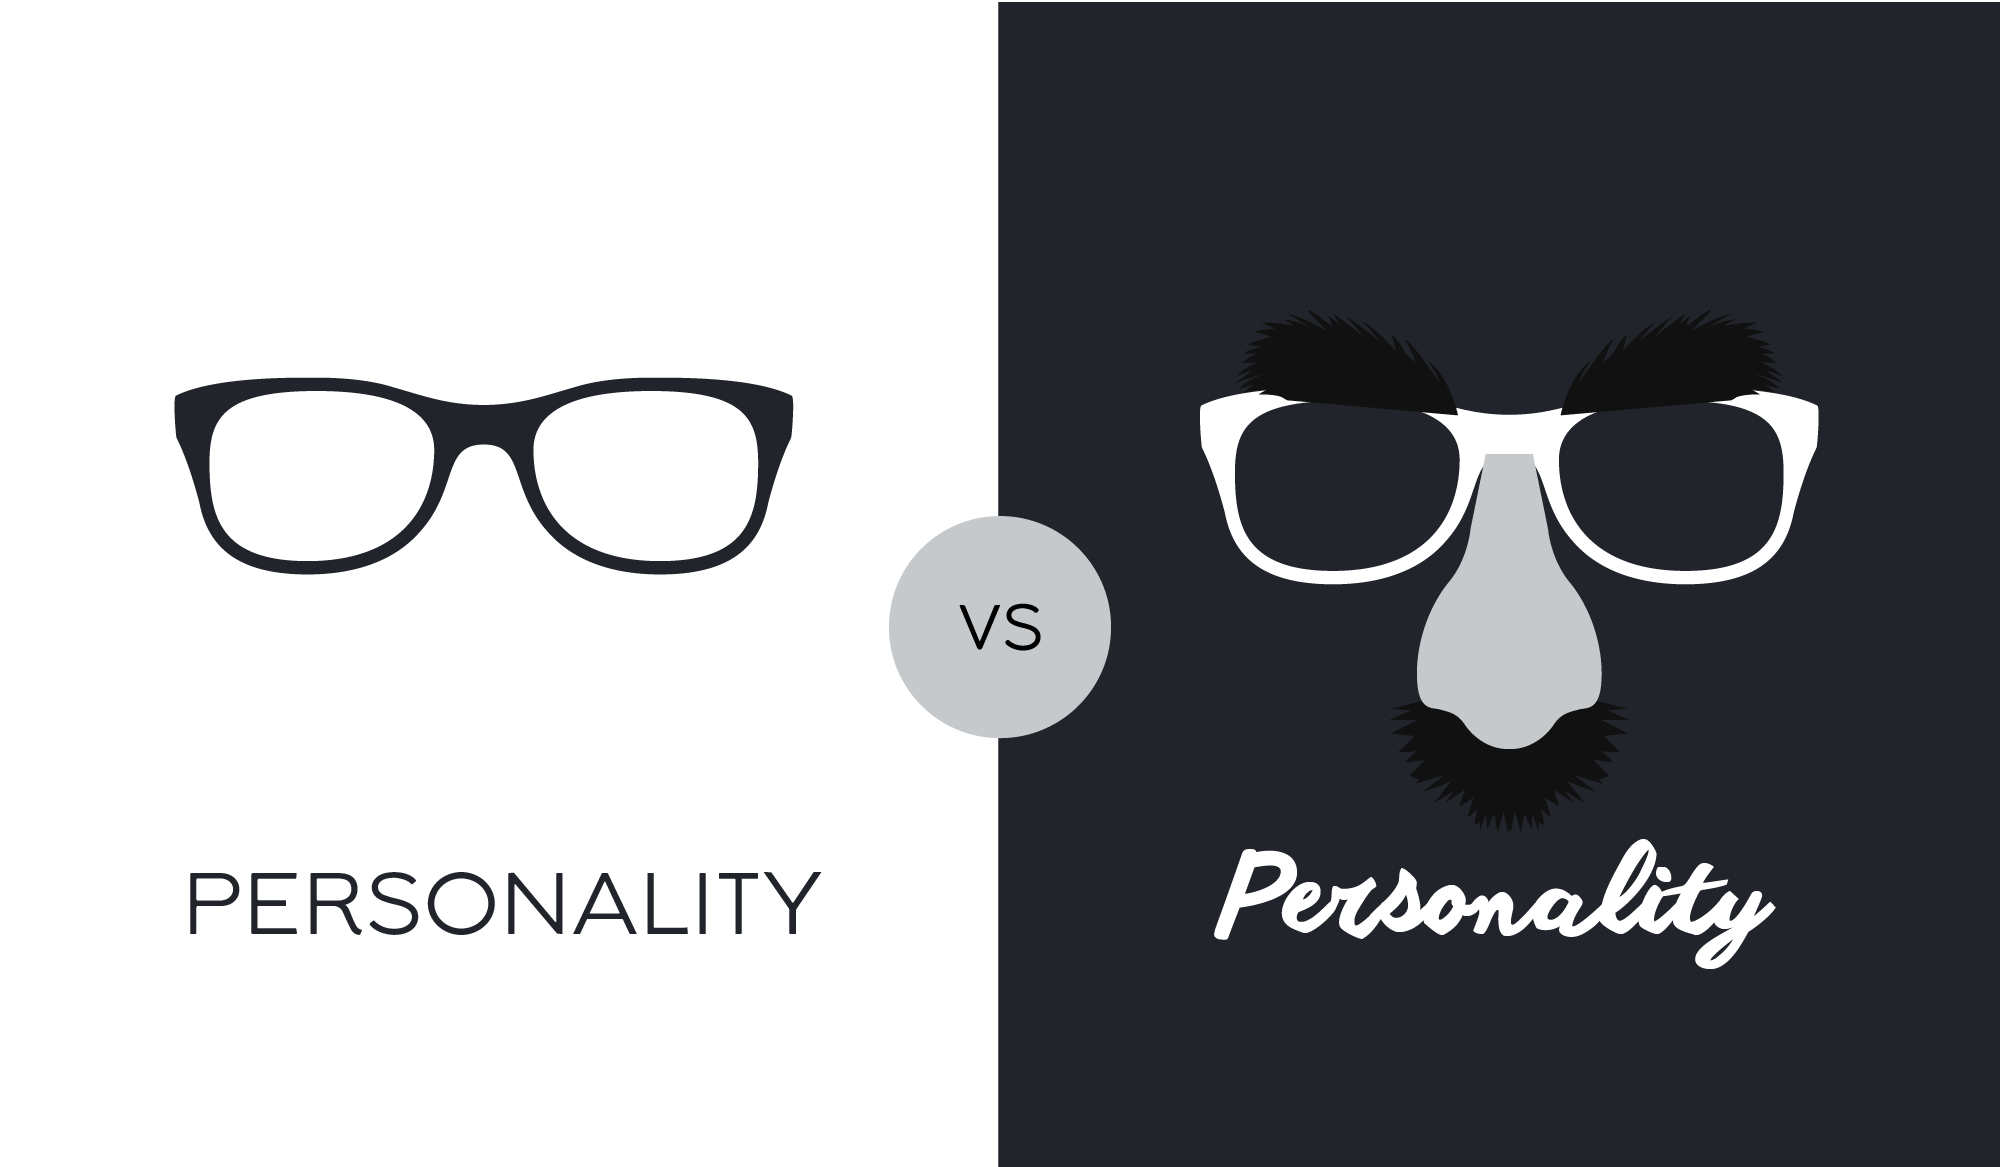 Personality Logo - What Makes a Great Logo?